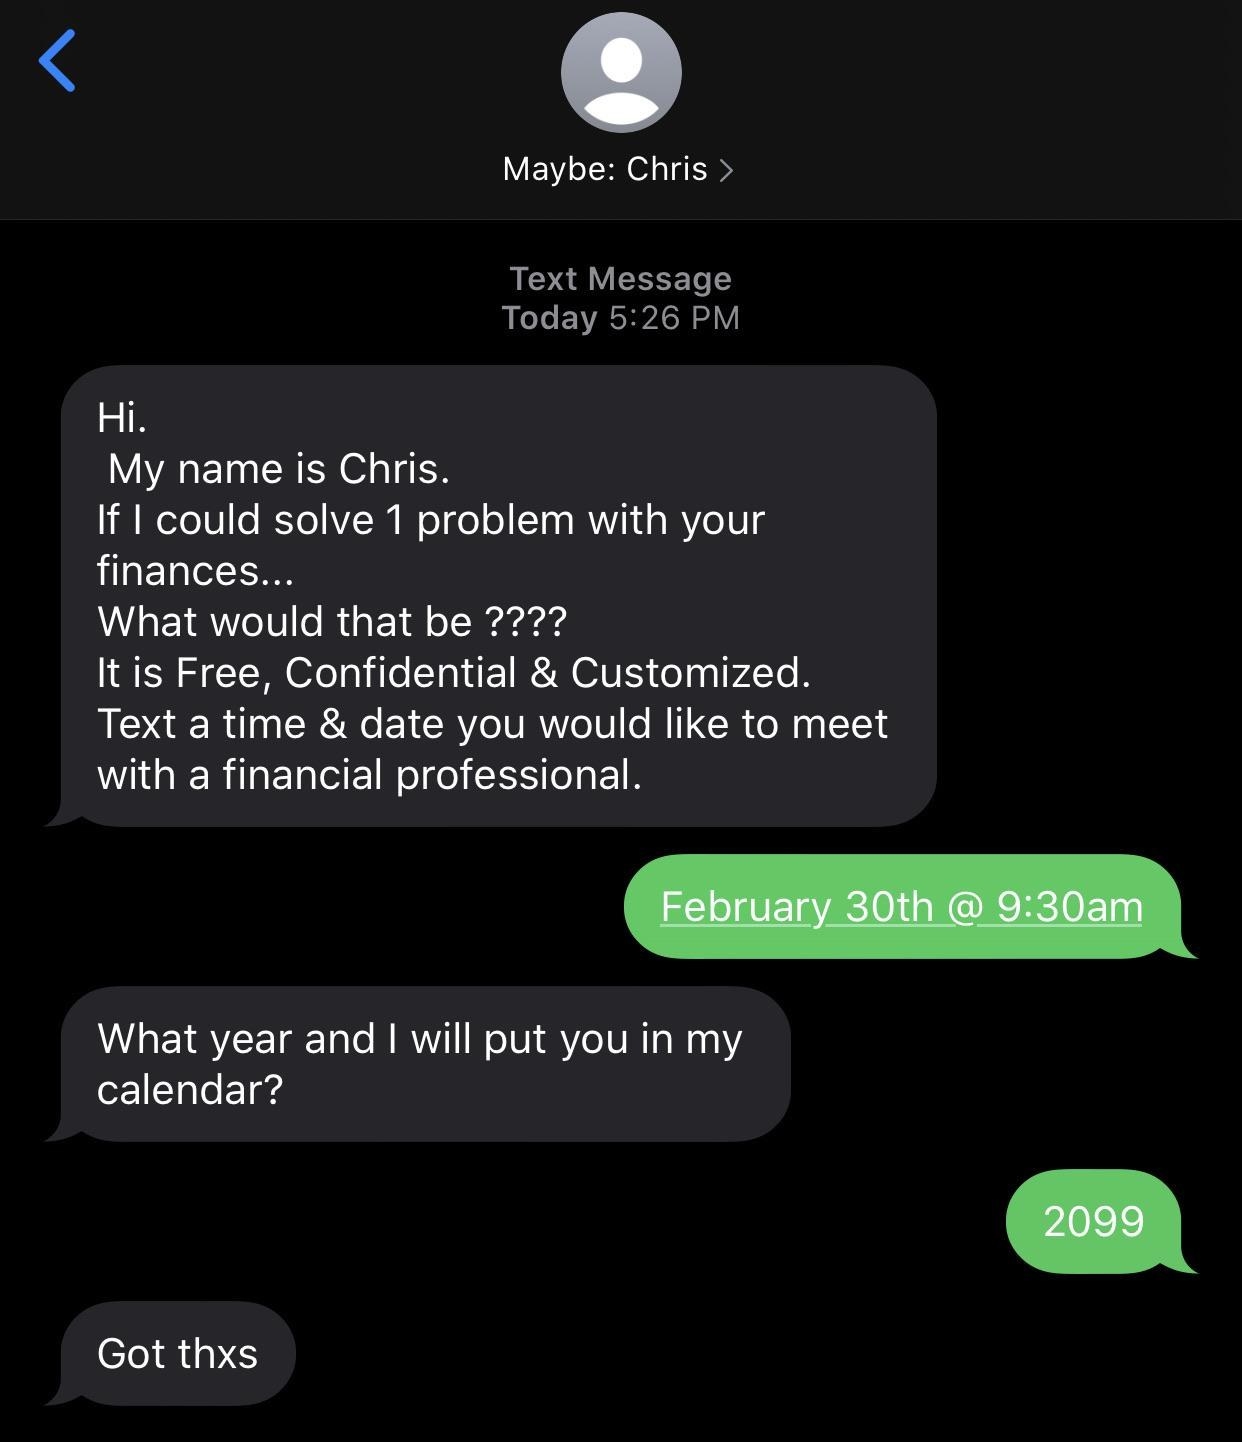 scammer tries to ask for a date to set up a meeting and the other person says feb 30th at 930 am in the year 2099